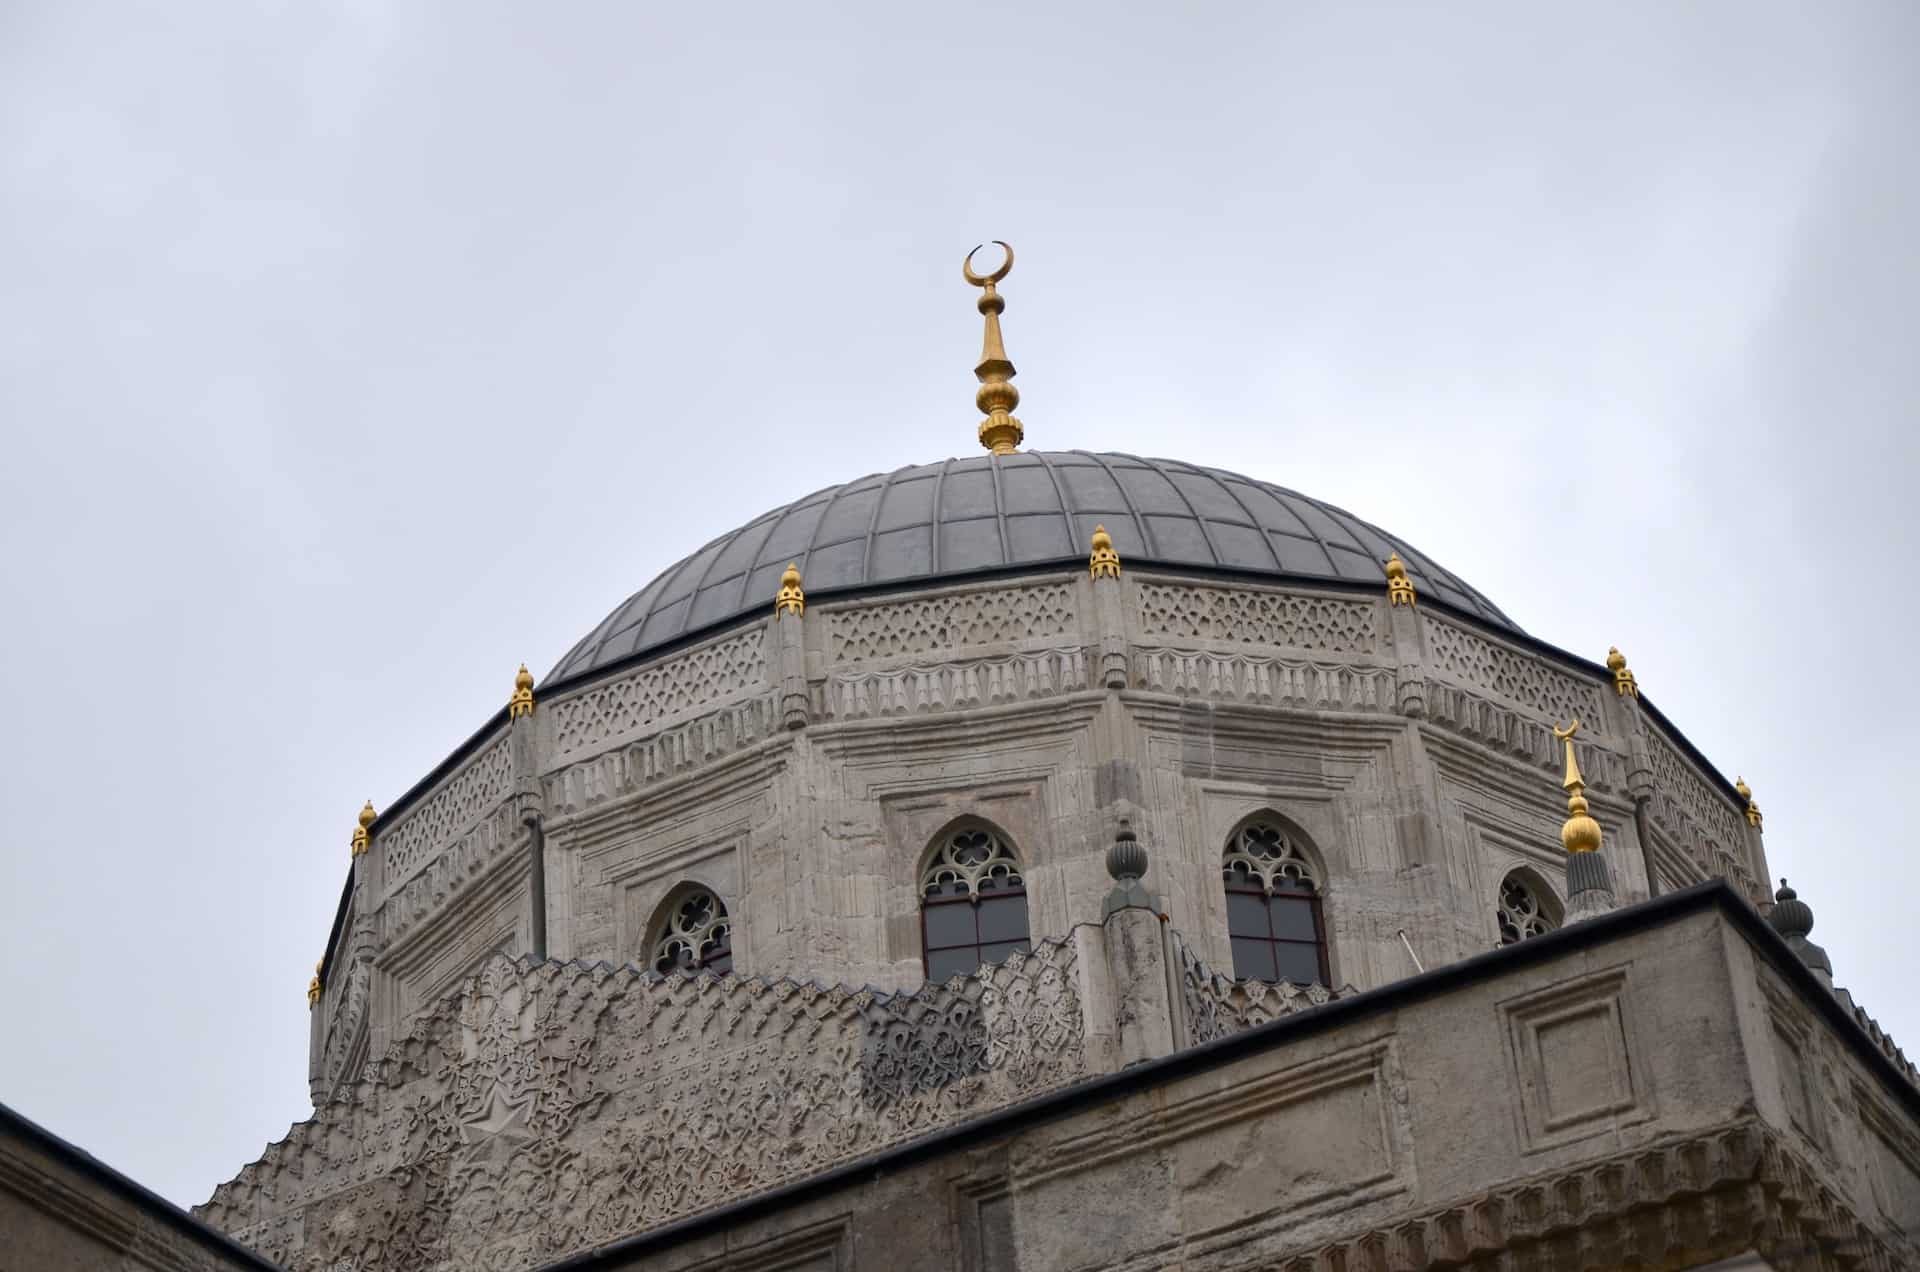 Dome of the Pertevniyal Valide Sultan Mosque in Aksaray, Istanbul, Turkey